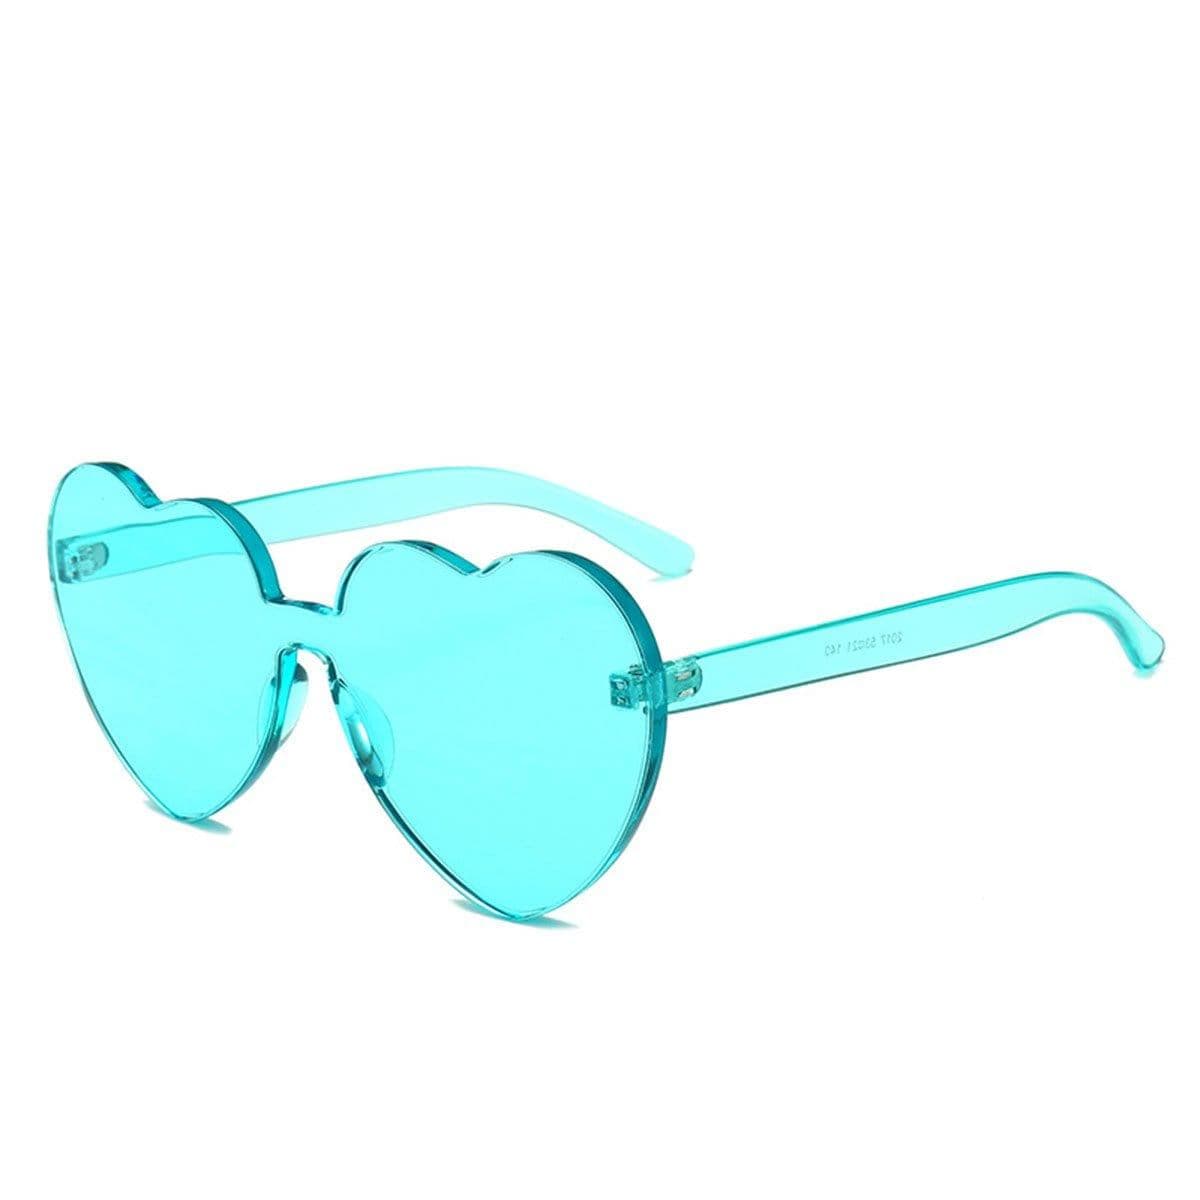 Buy Costume Accessories Turquoise Fashion Shaped Sunglasses for Adults sold at Party Expert